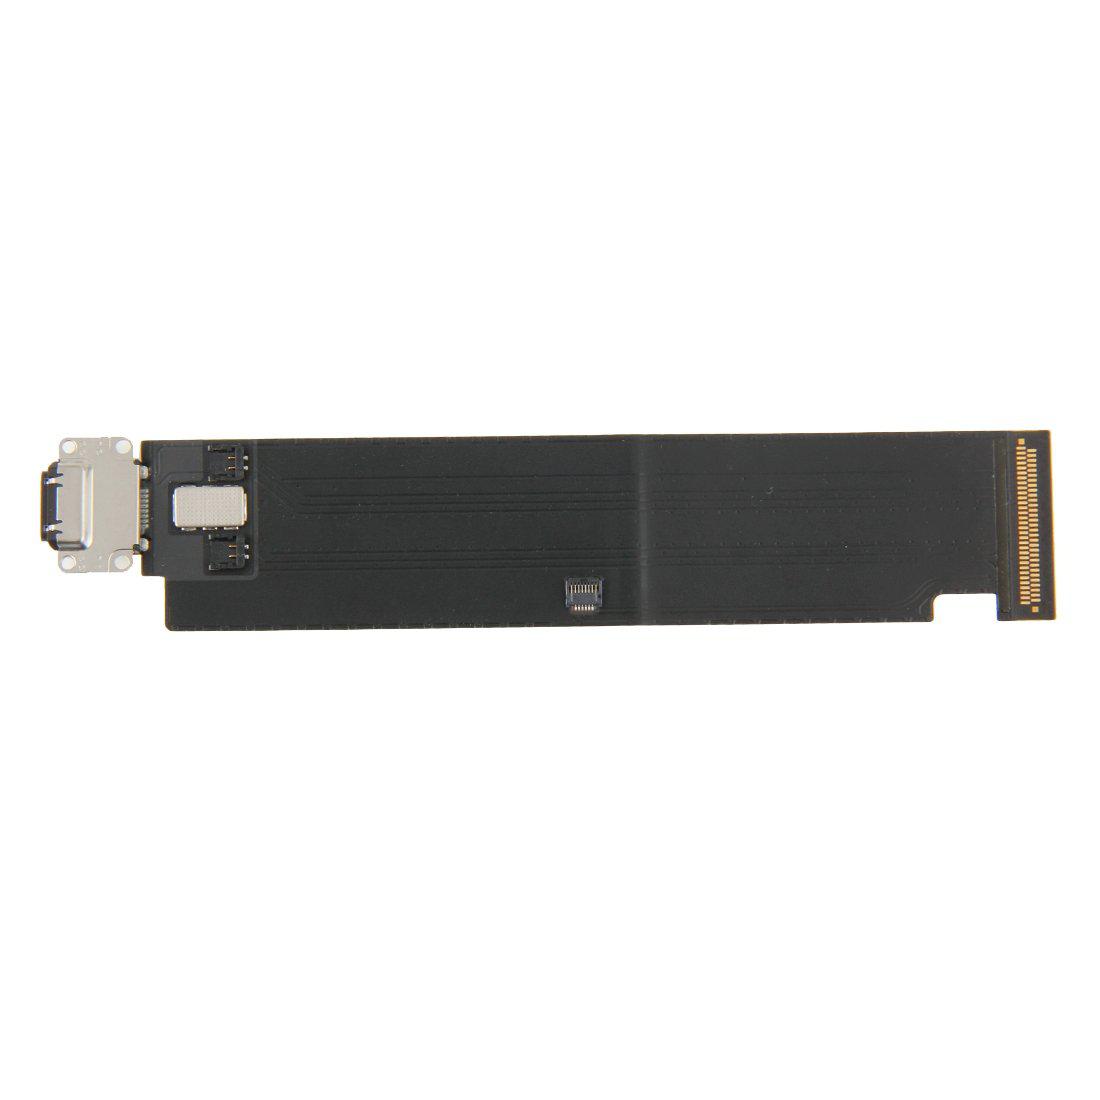 Apple iPad Pro 12.9" Charging Port Connector Flex Cable - Black for [product_price] - First Help Tech